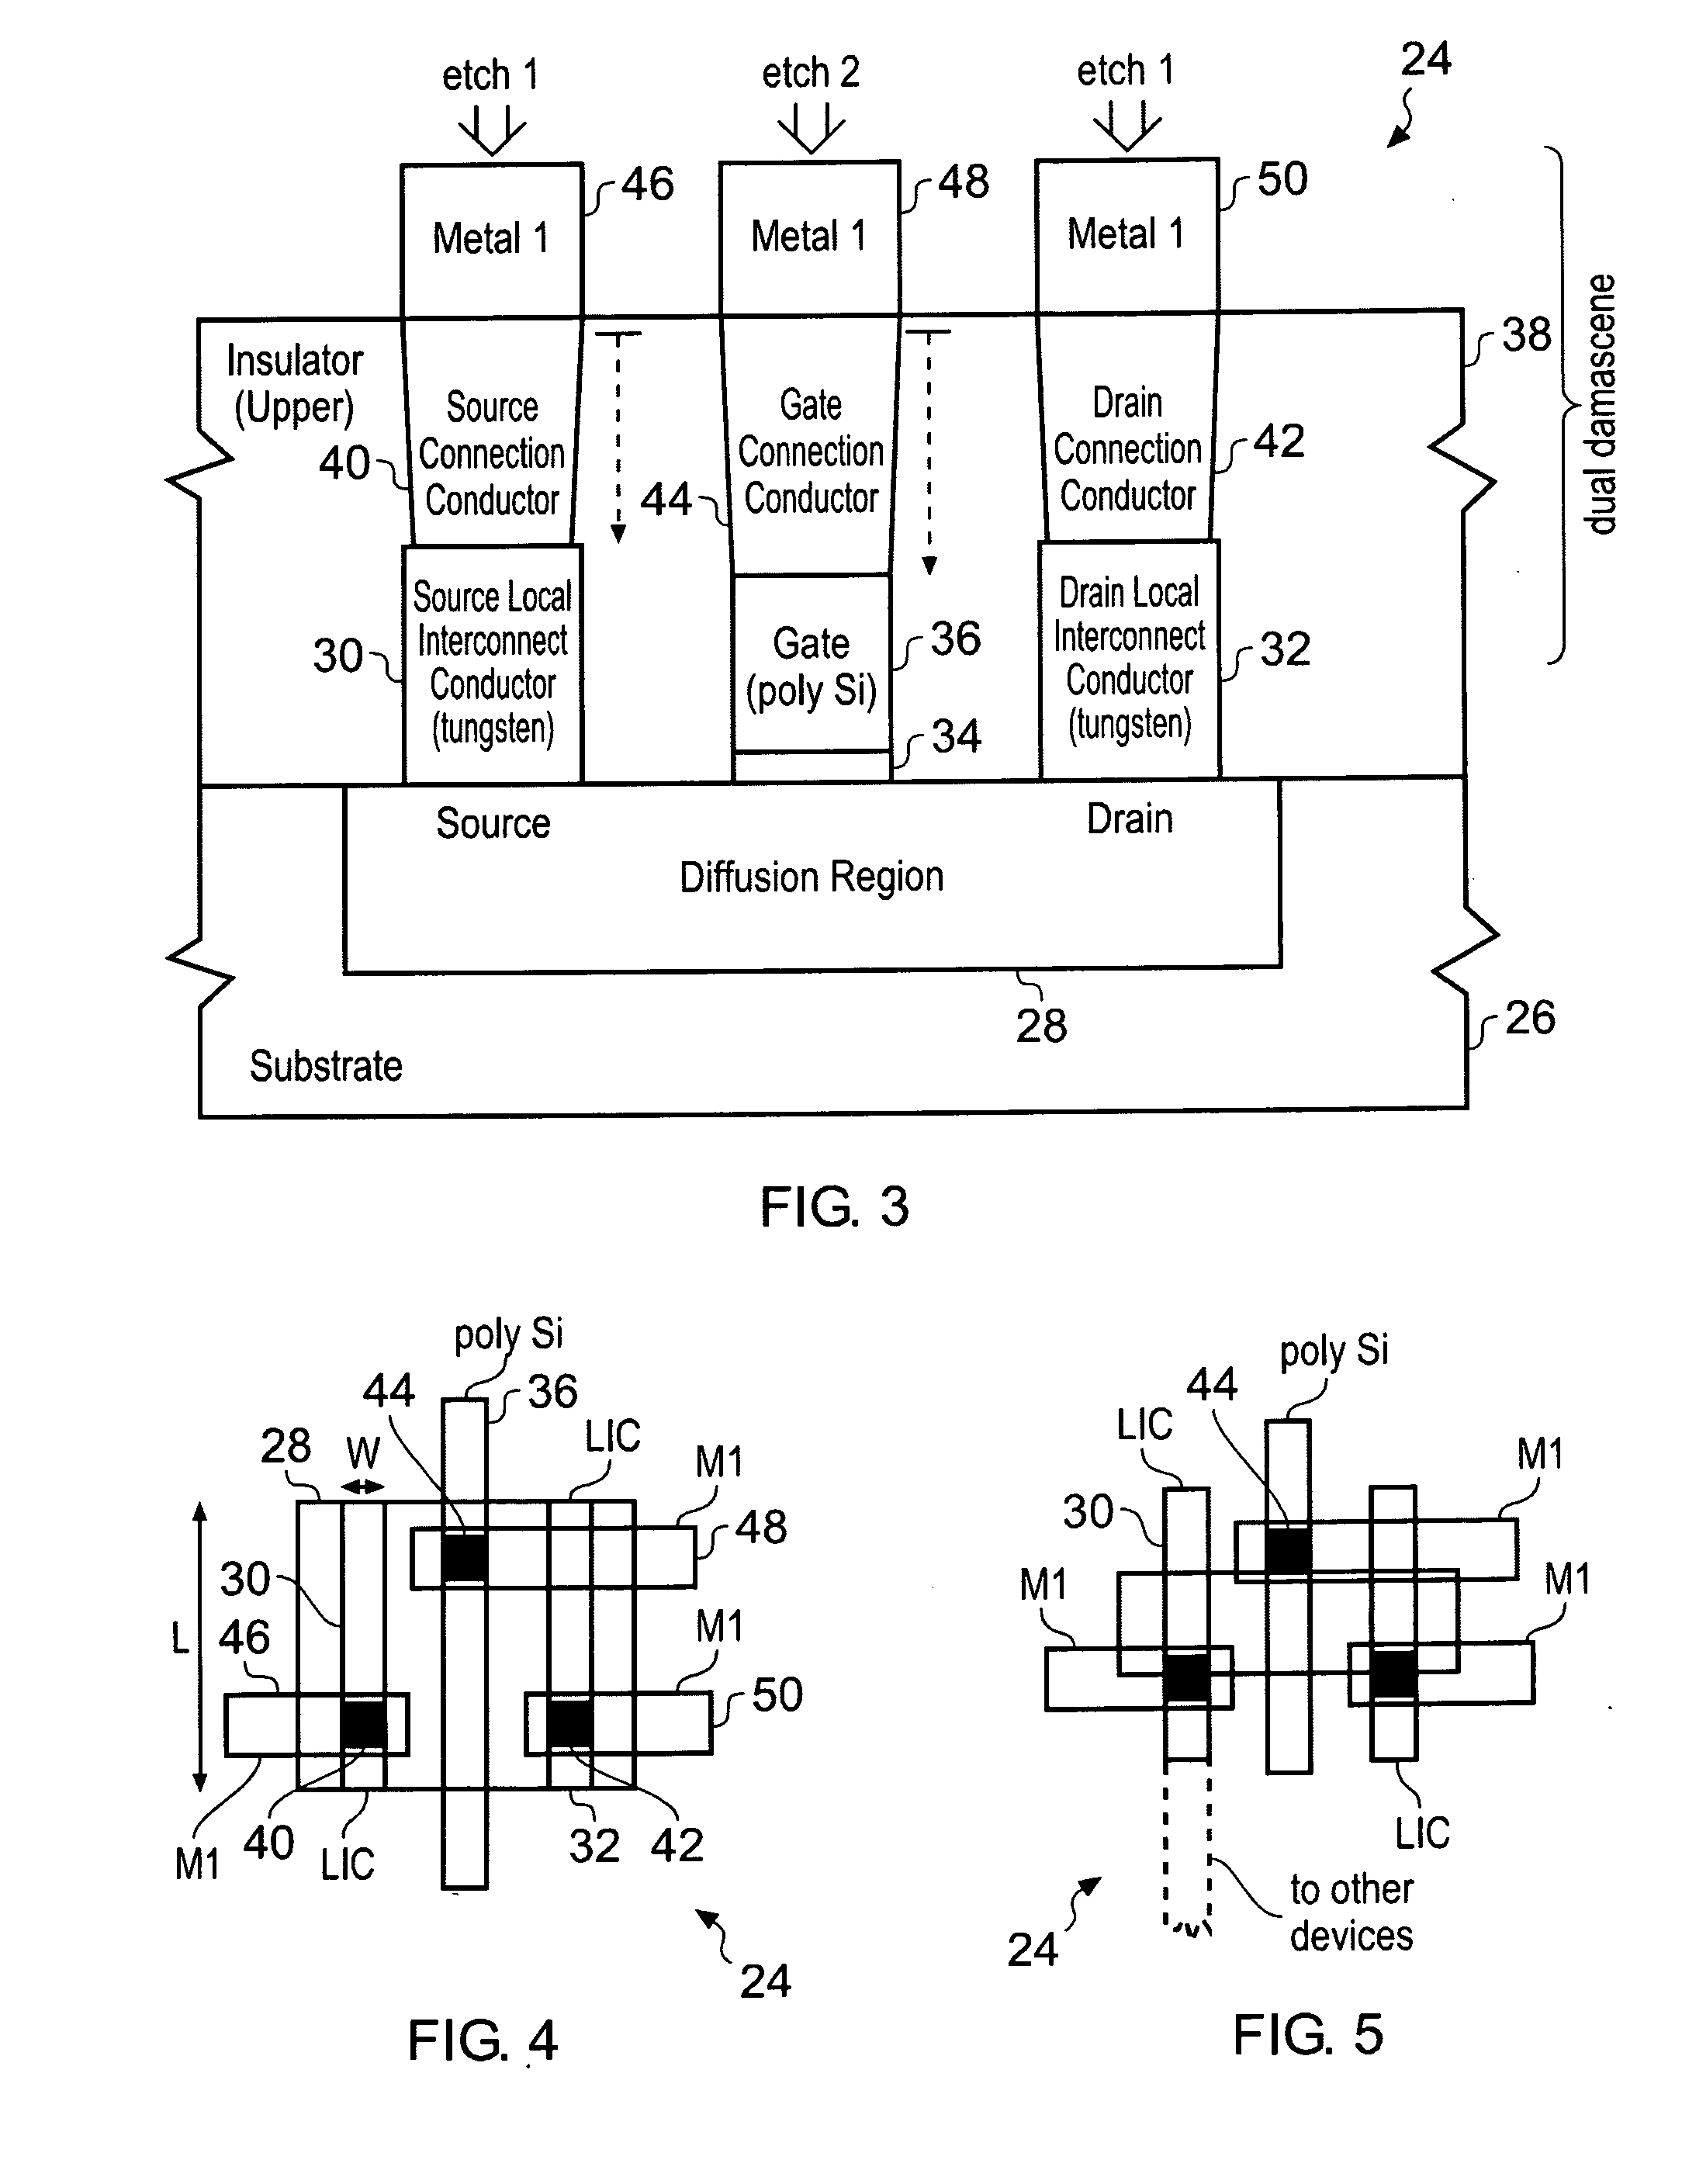 Integrated circuit and a method of making an integrated circuit to provide a gate contact over a diffusion region